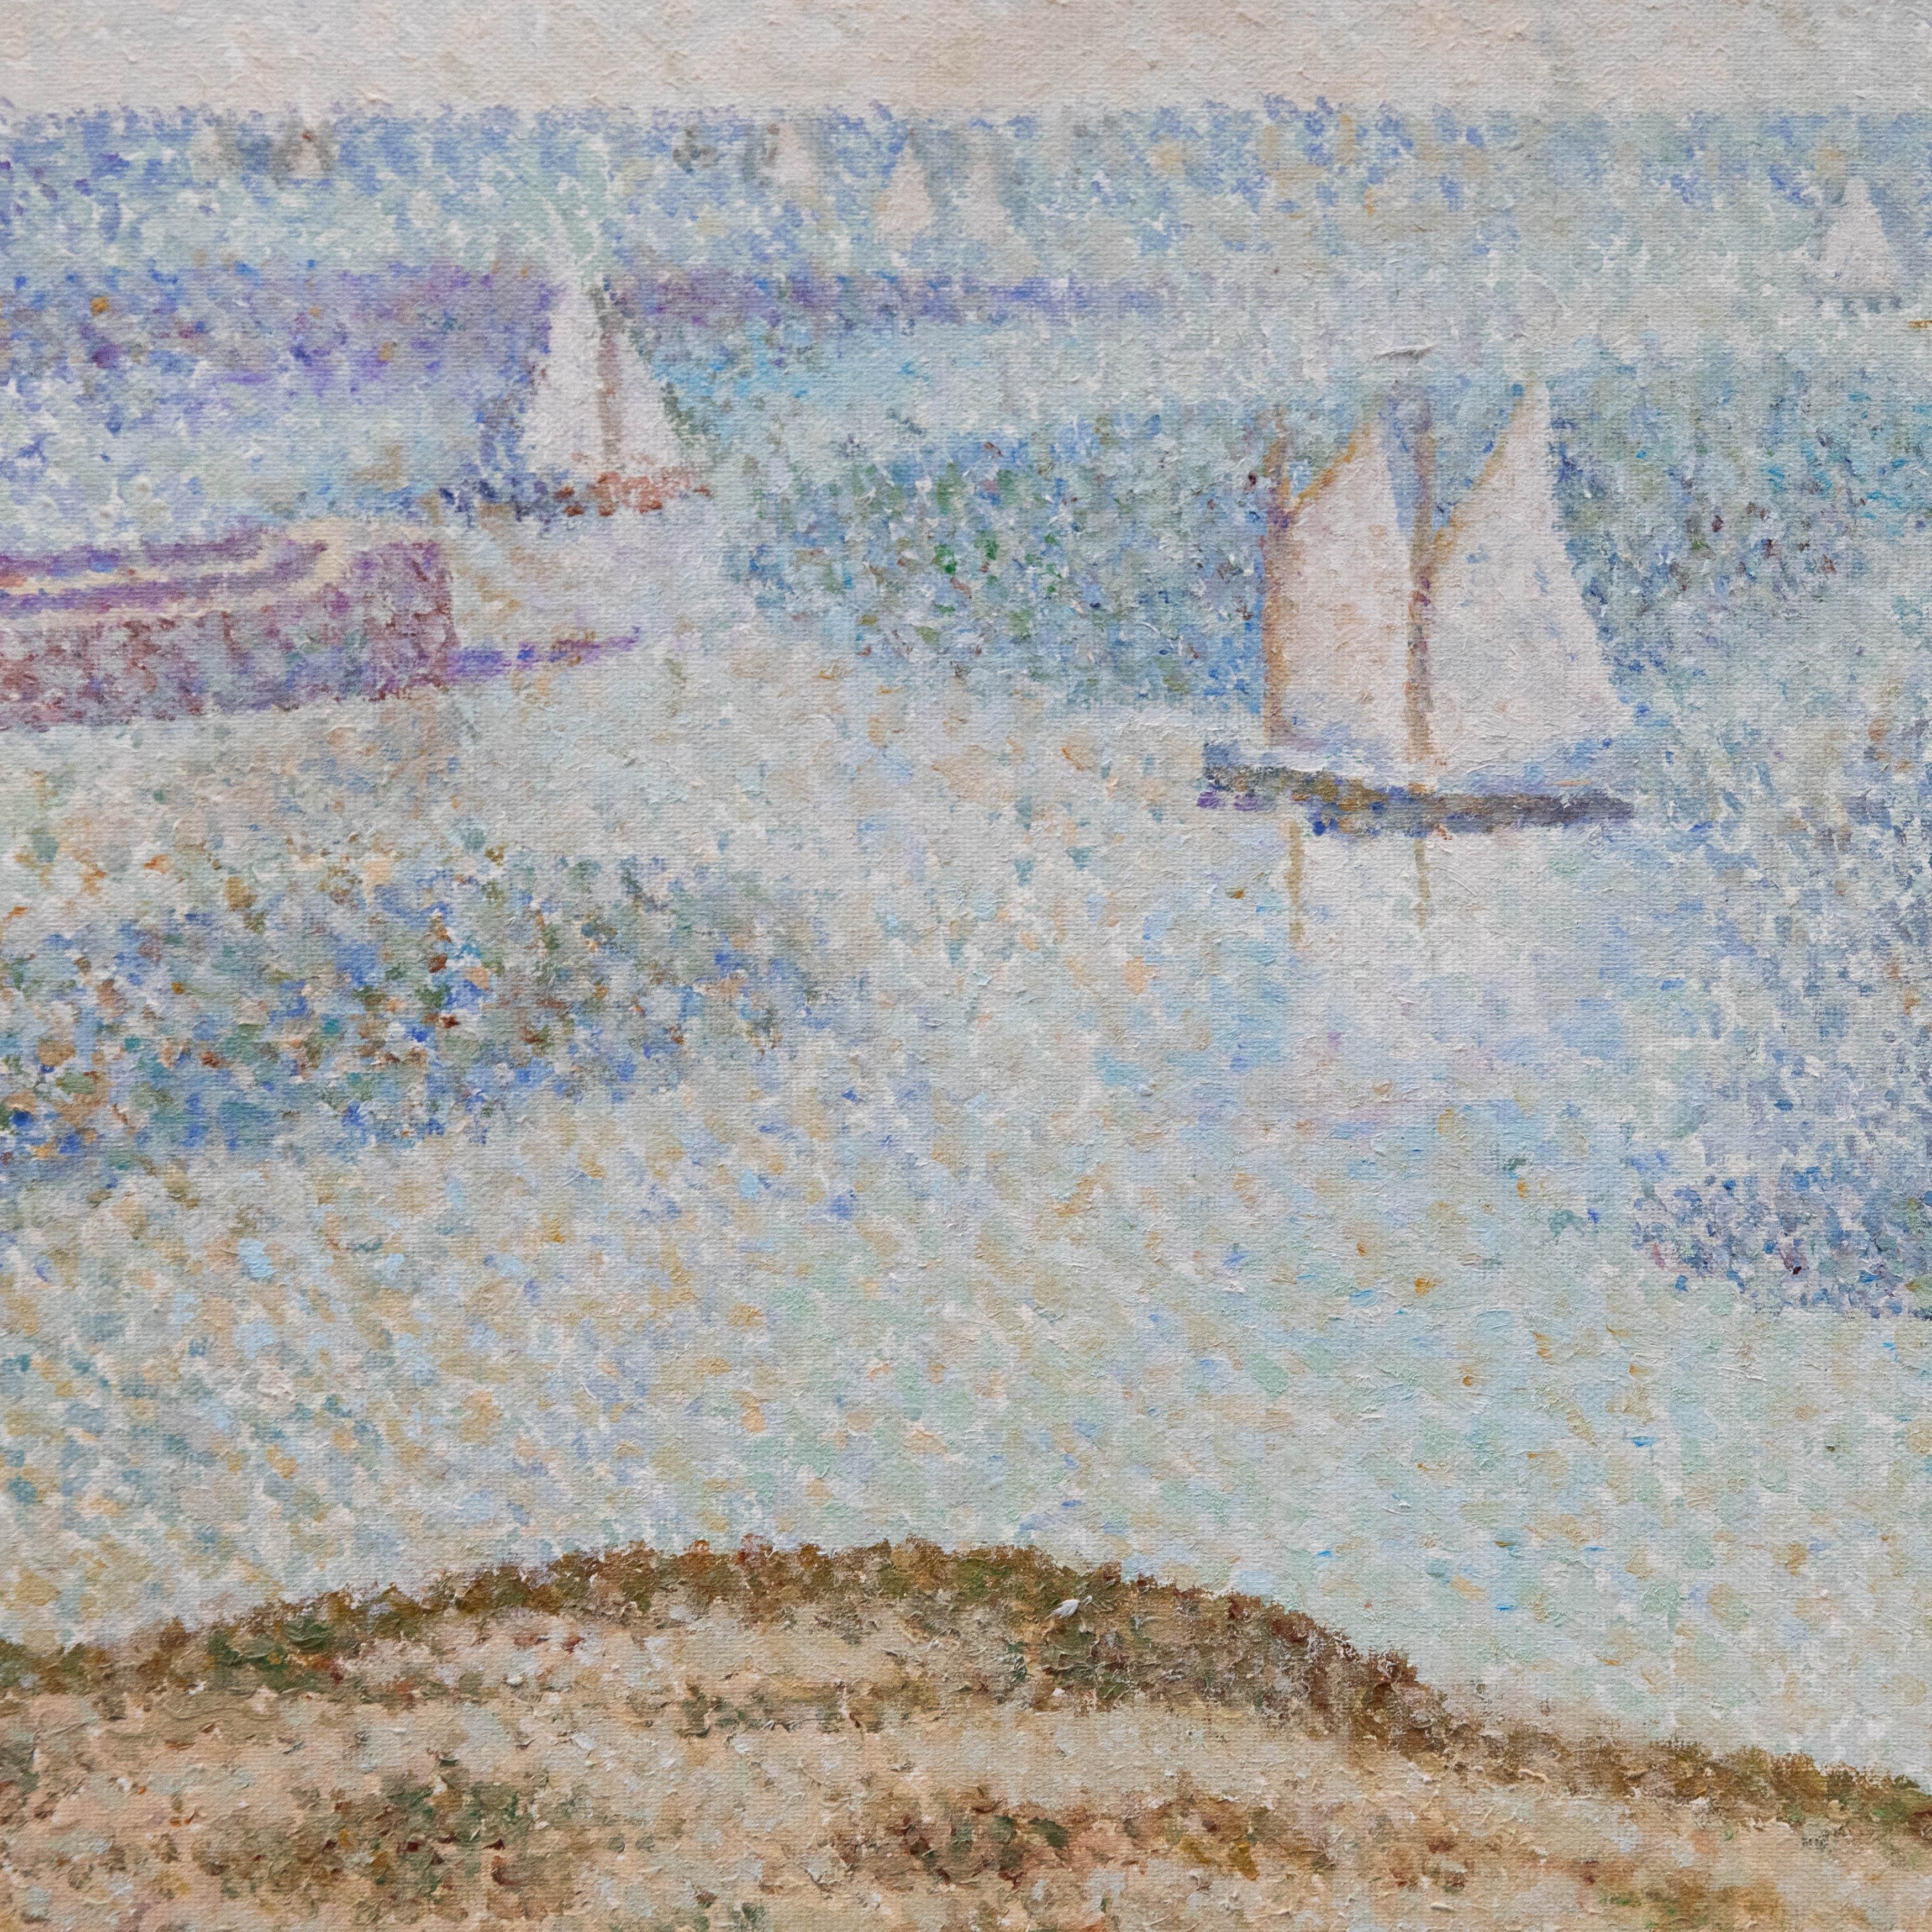 A fine copy of Georges Seurat (1859-1891) pointillist study, Port-en-Bessin. Signed indistinctly and dated '2003' to the reverse. On canvas on stretchers. 